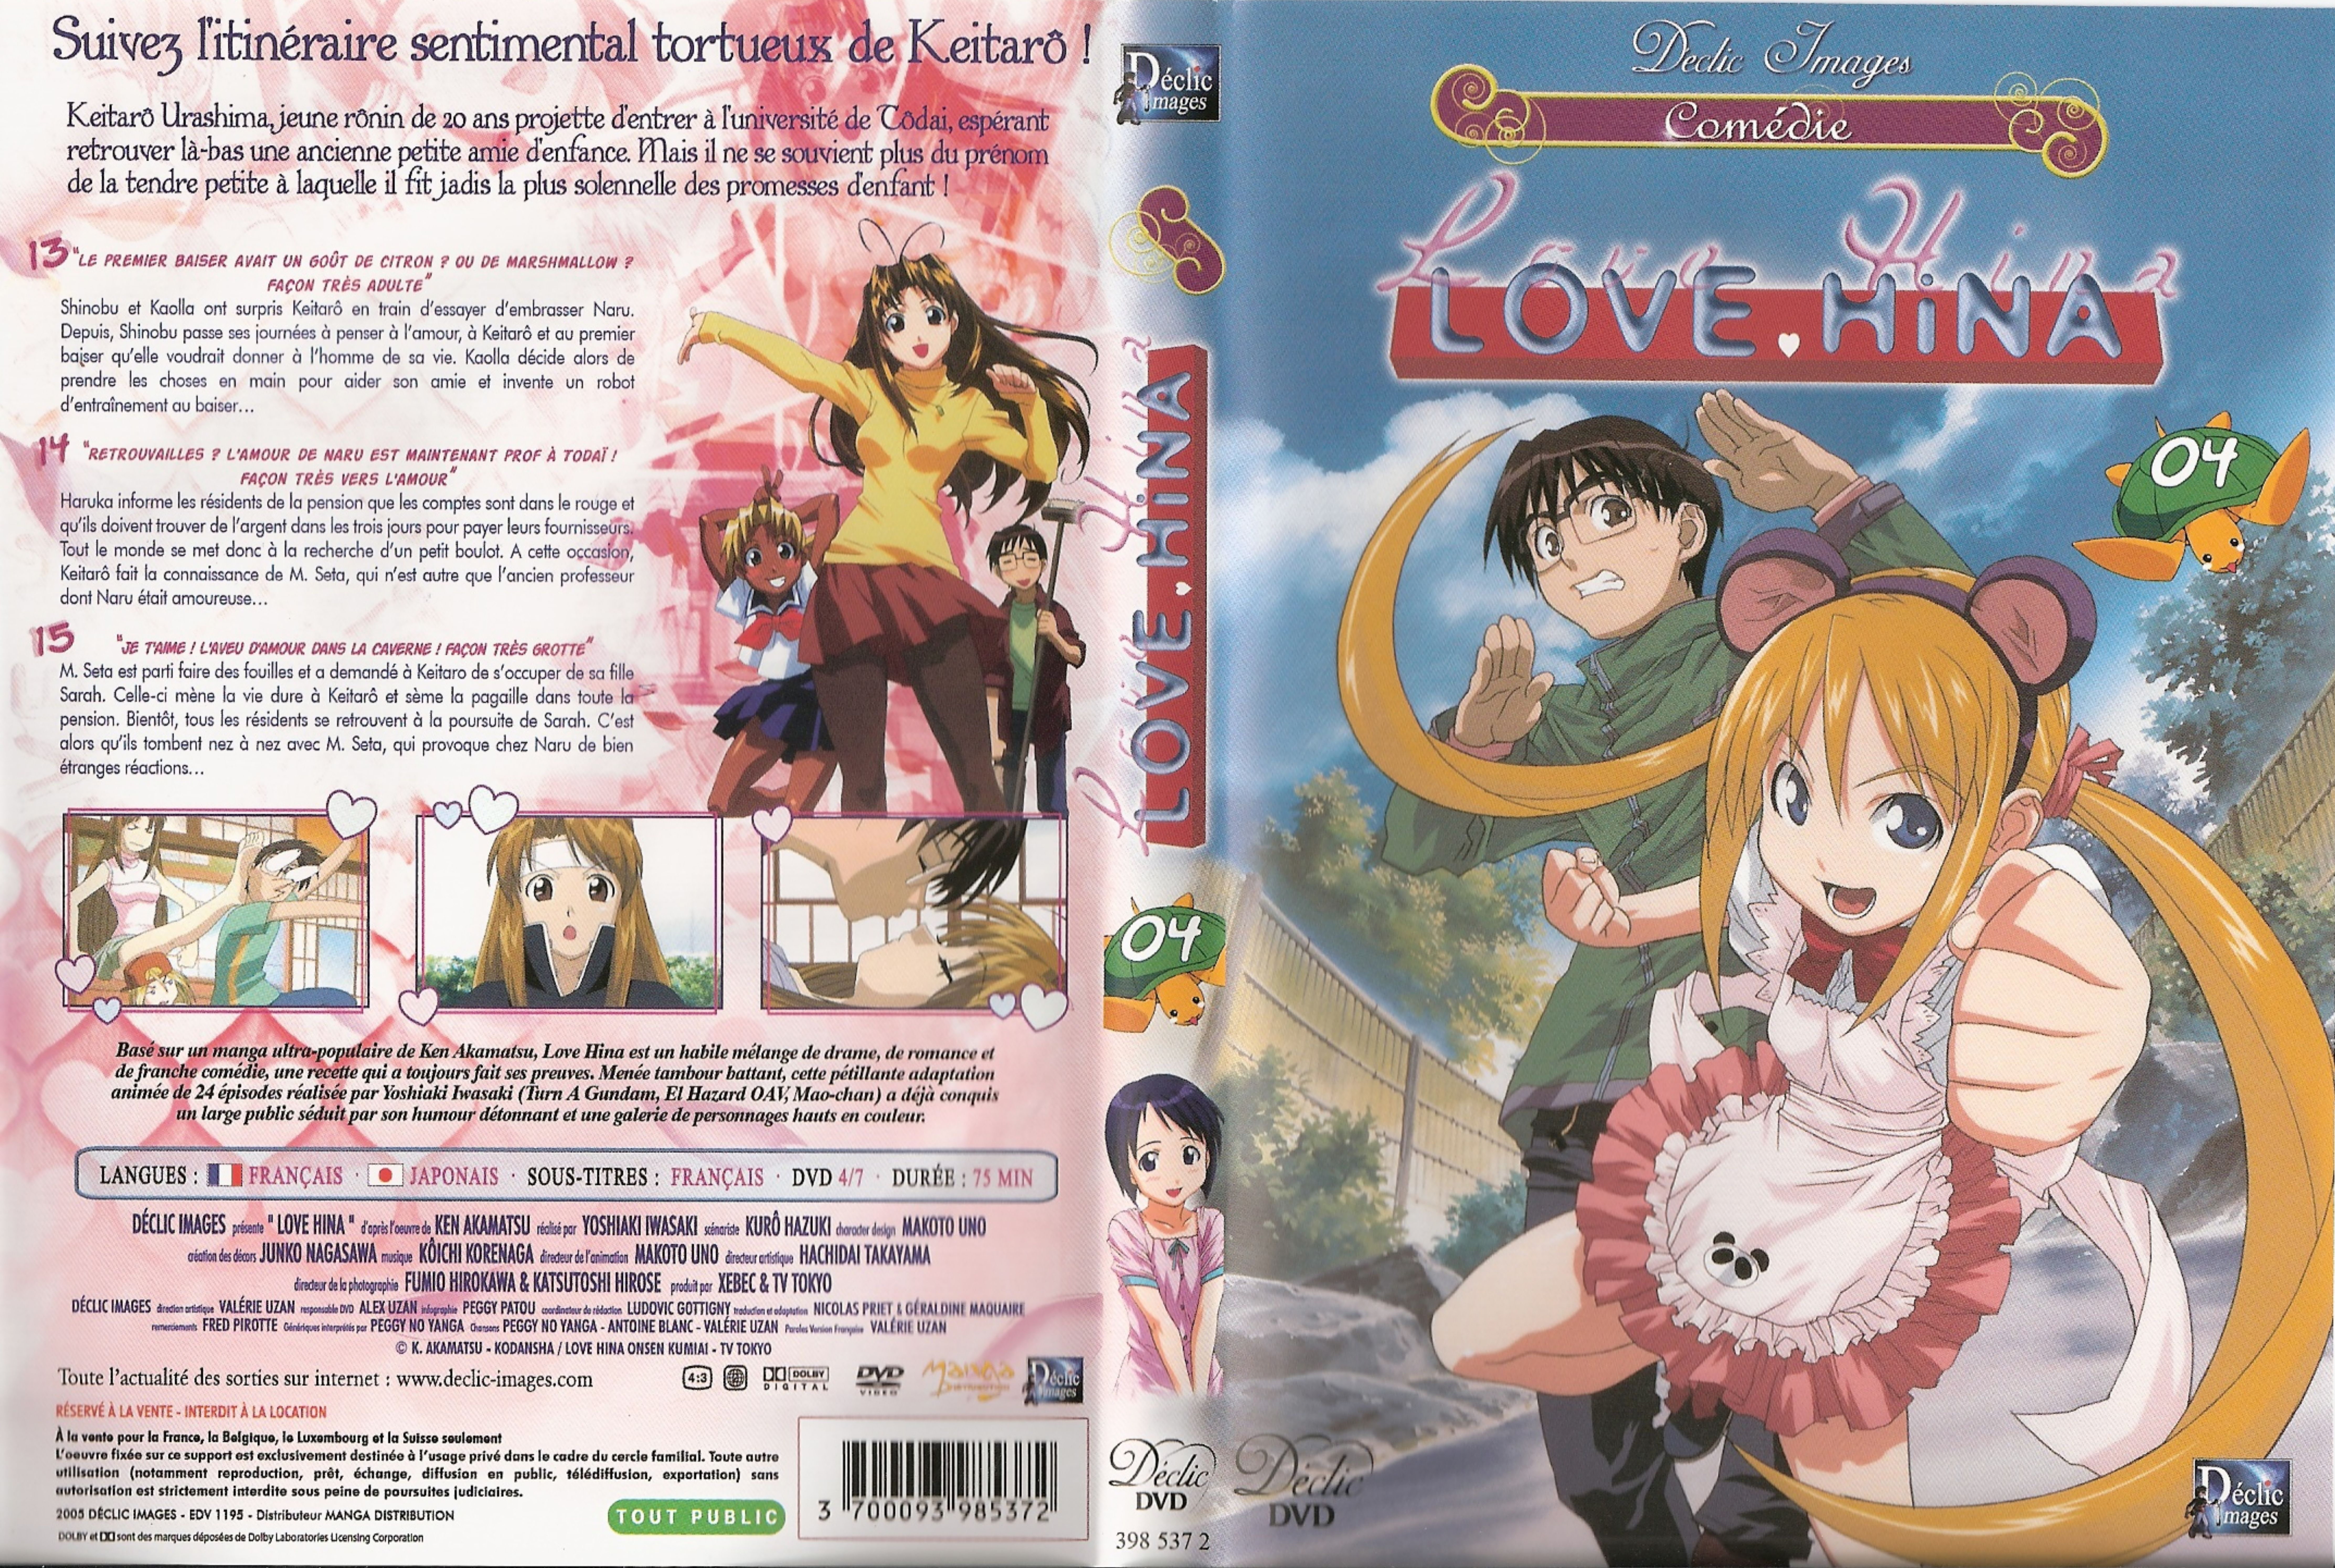 Jaquette DVD Love Hina DVD 04